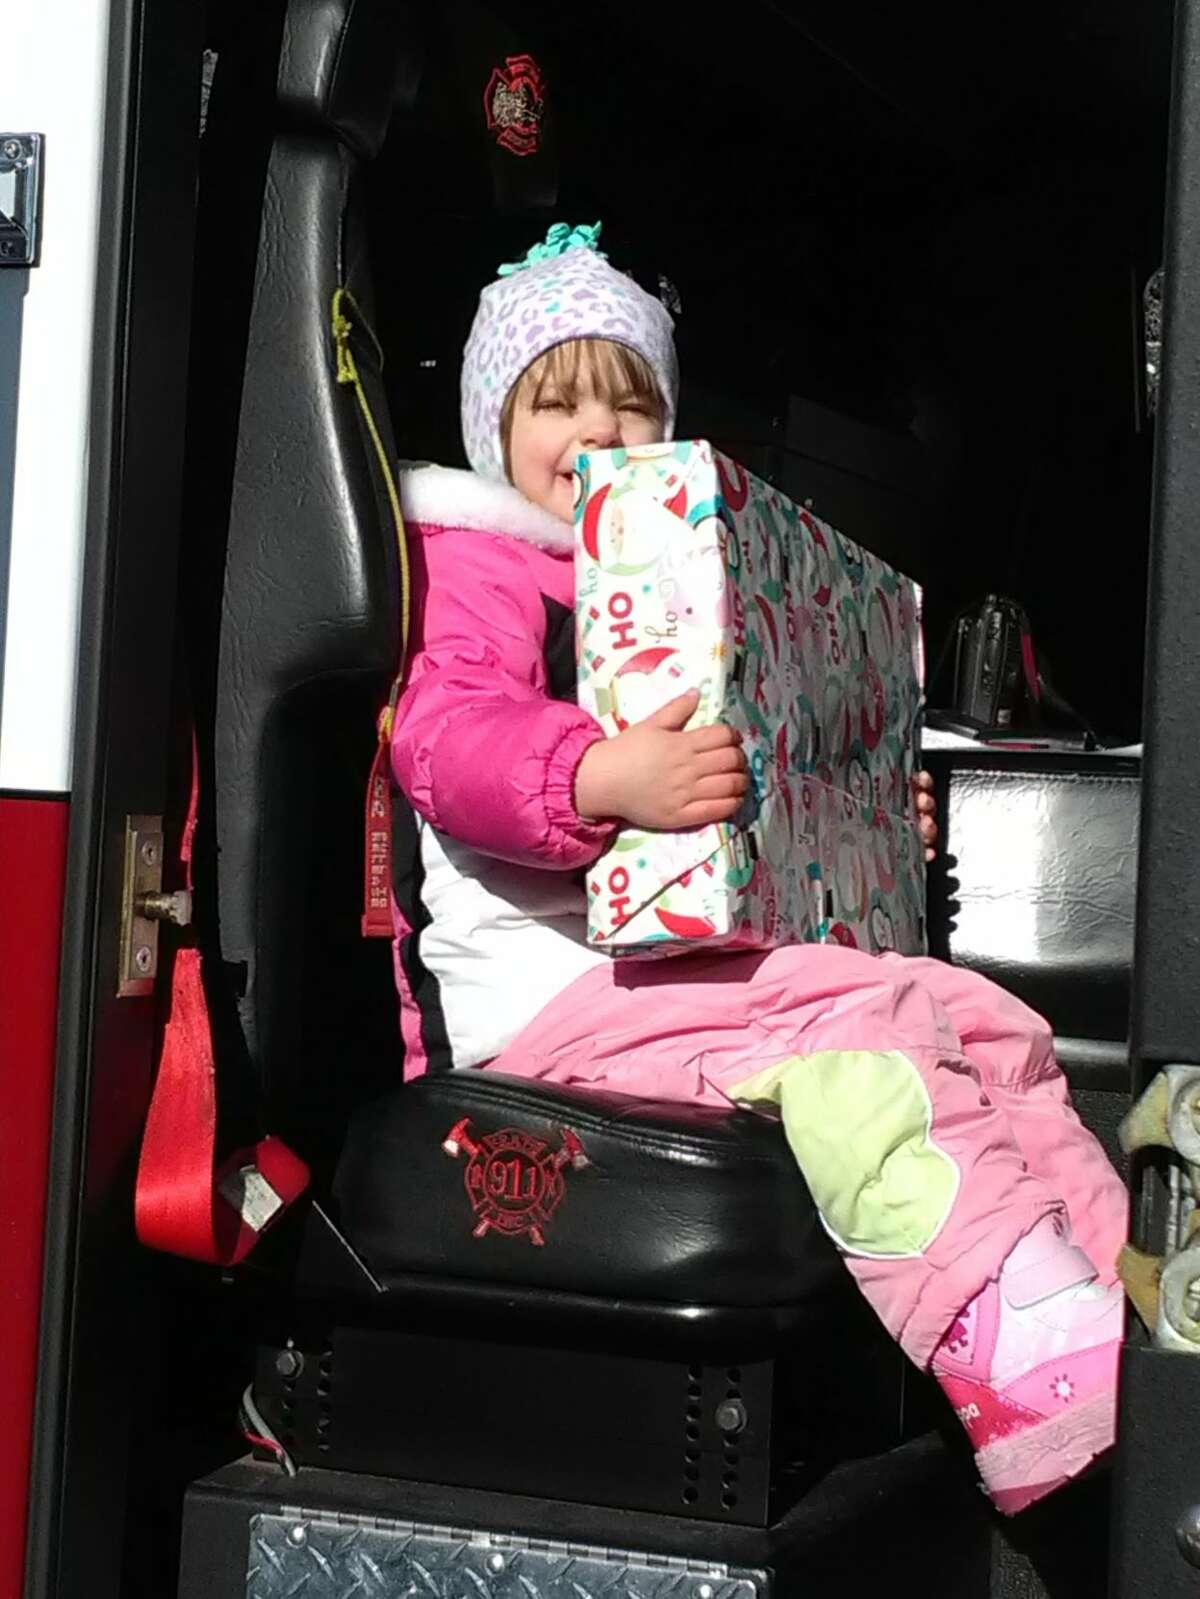 Santa Claus visited families on Eden Lane in New Milford on Sunday, Dec. 10 for Water Witch Hose Company No. 2's annual Santa Express. Each child received a gift from Santa and a chance to sit in the fire truck, including Johnna Morse, 2.